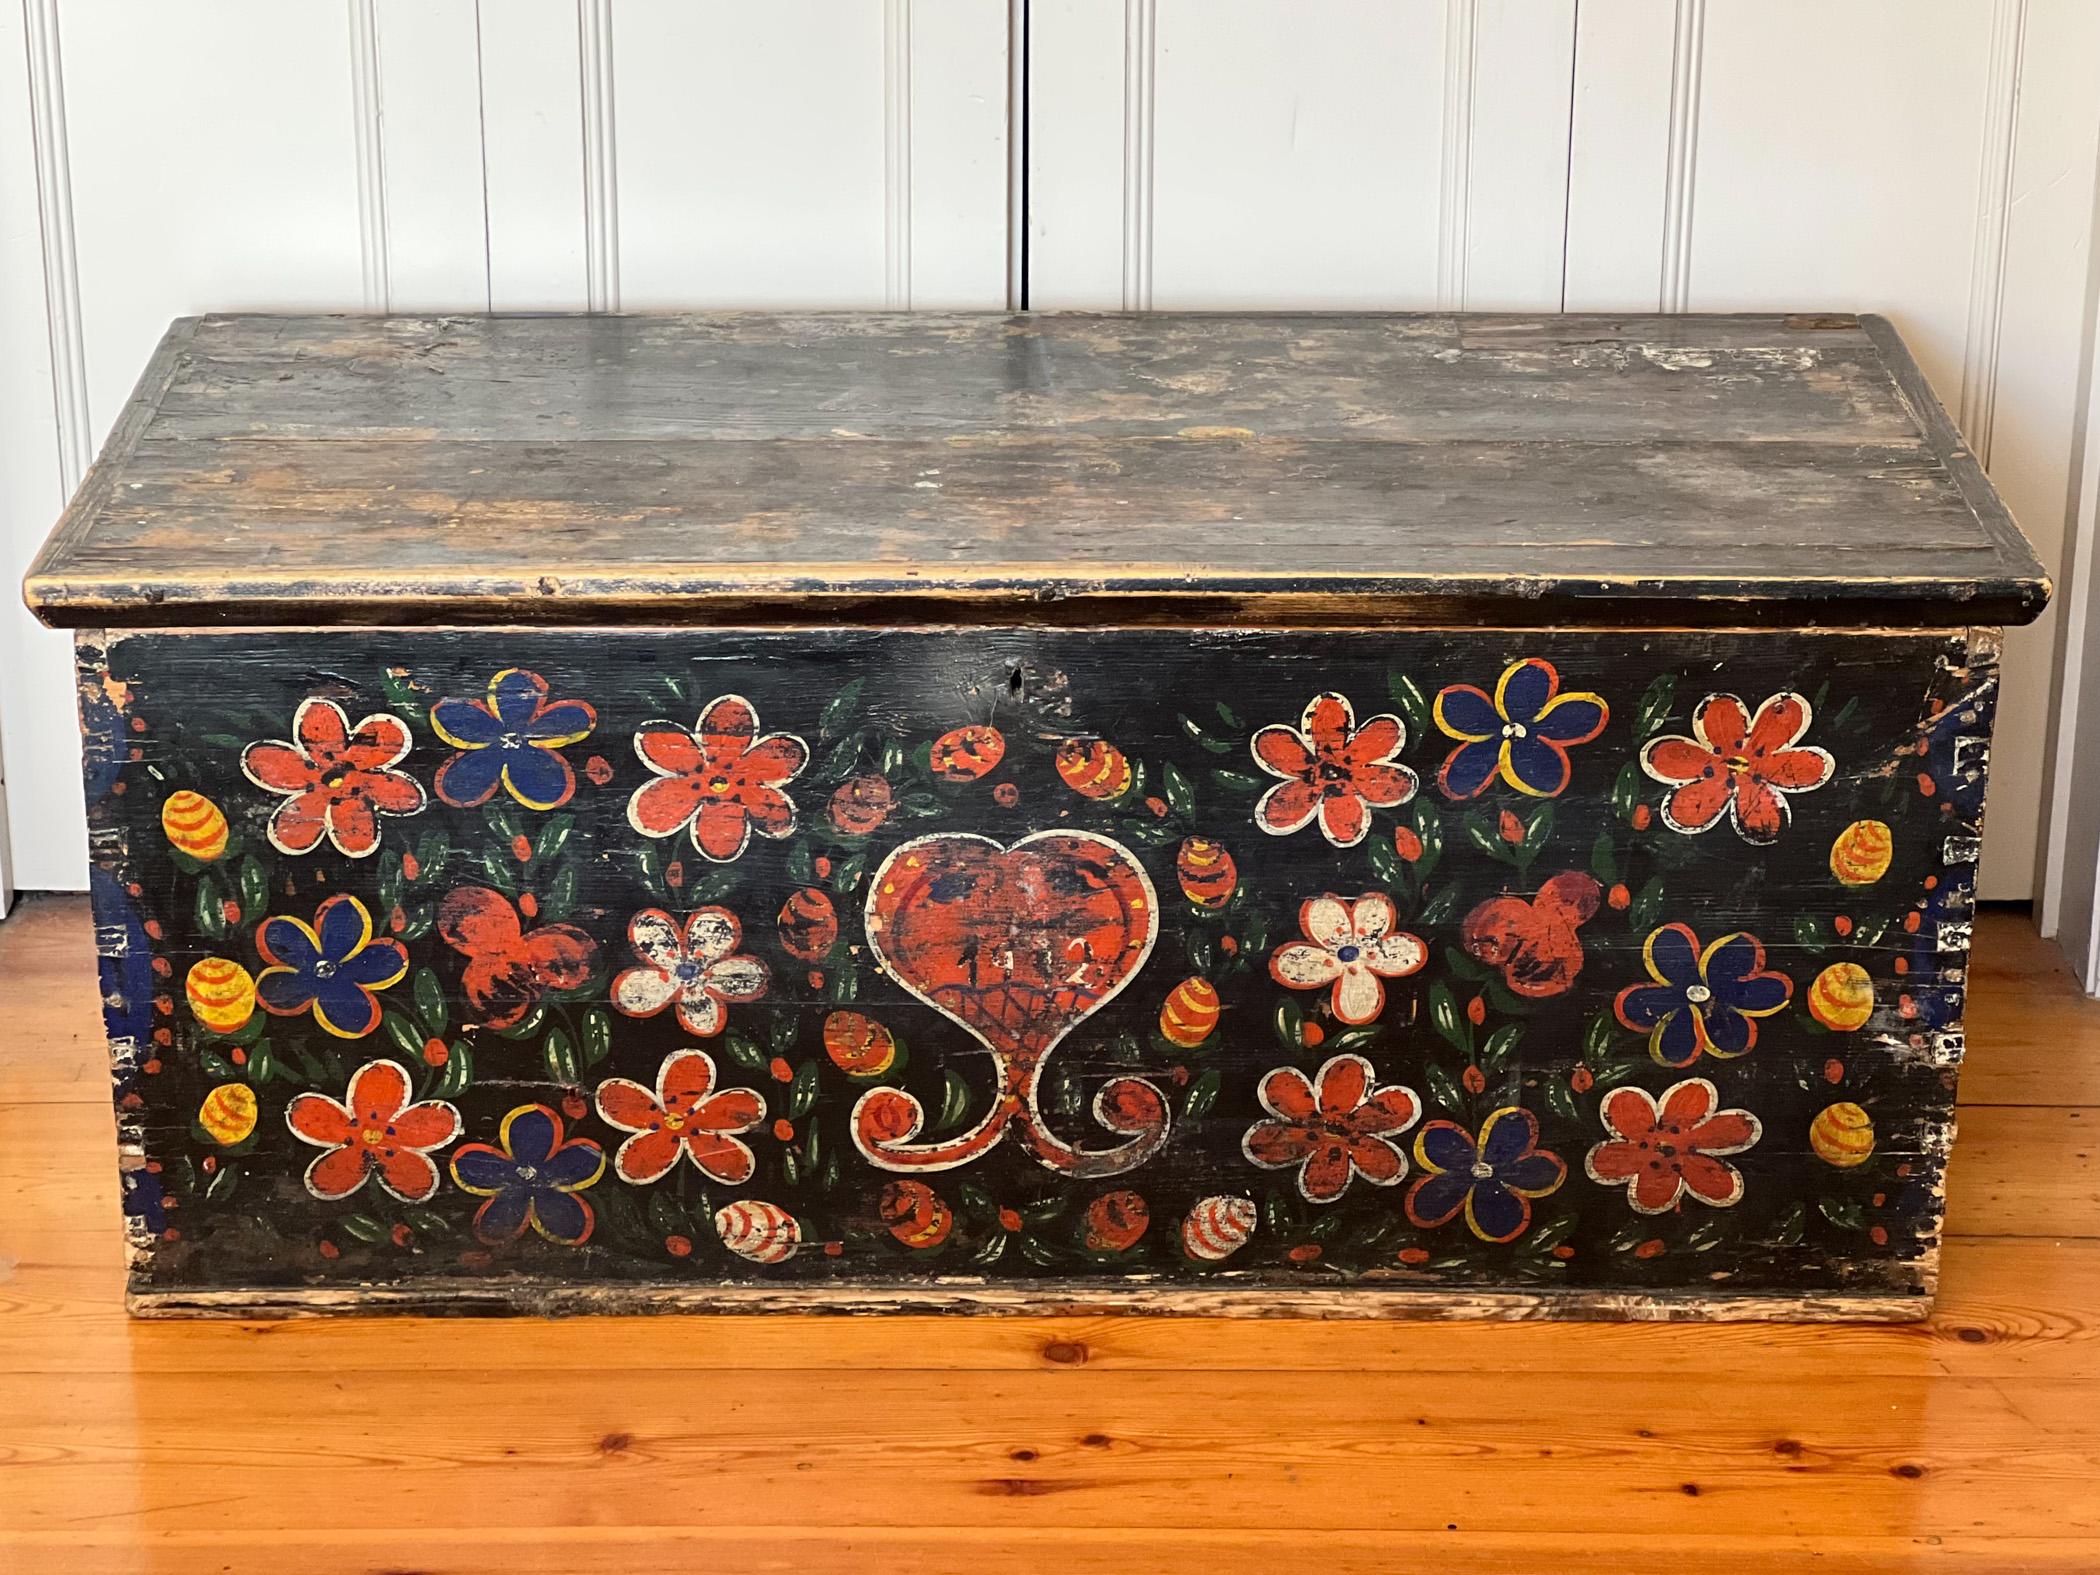 A late 19 C chest from Brittany, France. The floral folk art paintwork on the front and sides will have been done more recently towards the late 1900s to revamp the original artwork. A very decorative piece, beautifully painted with its original